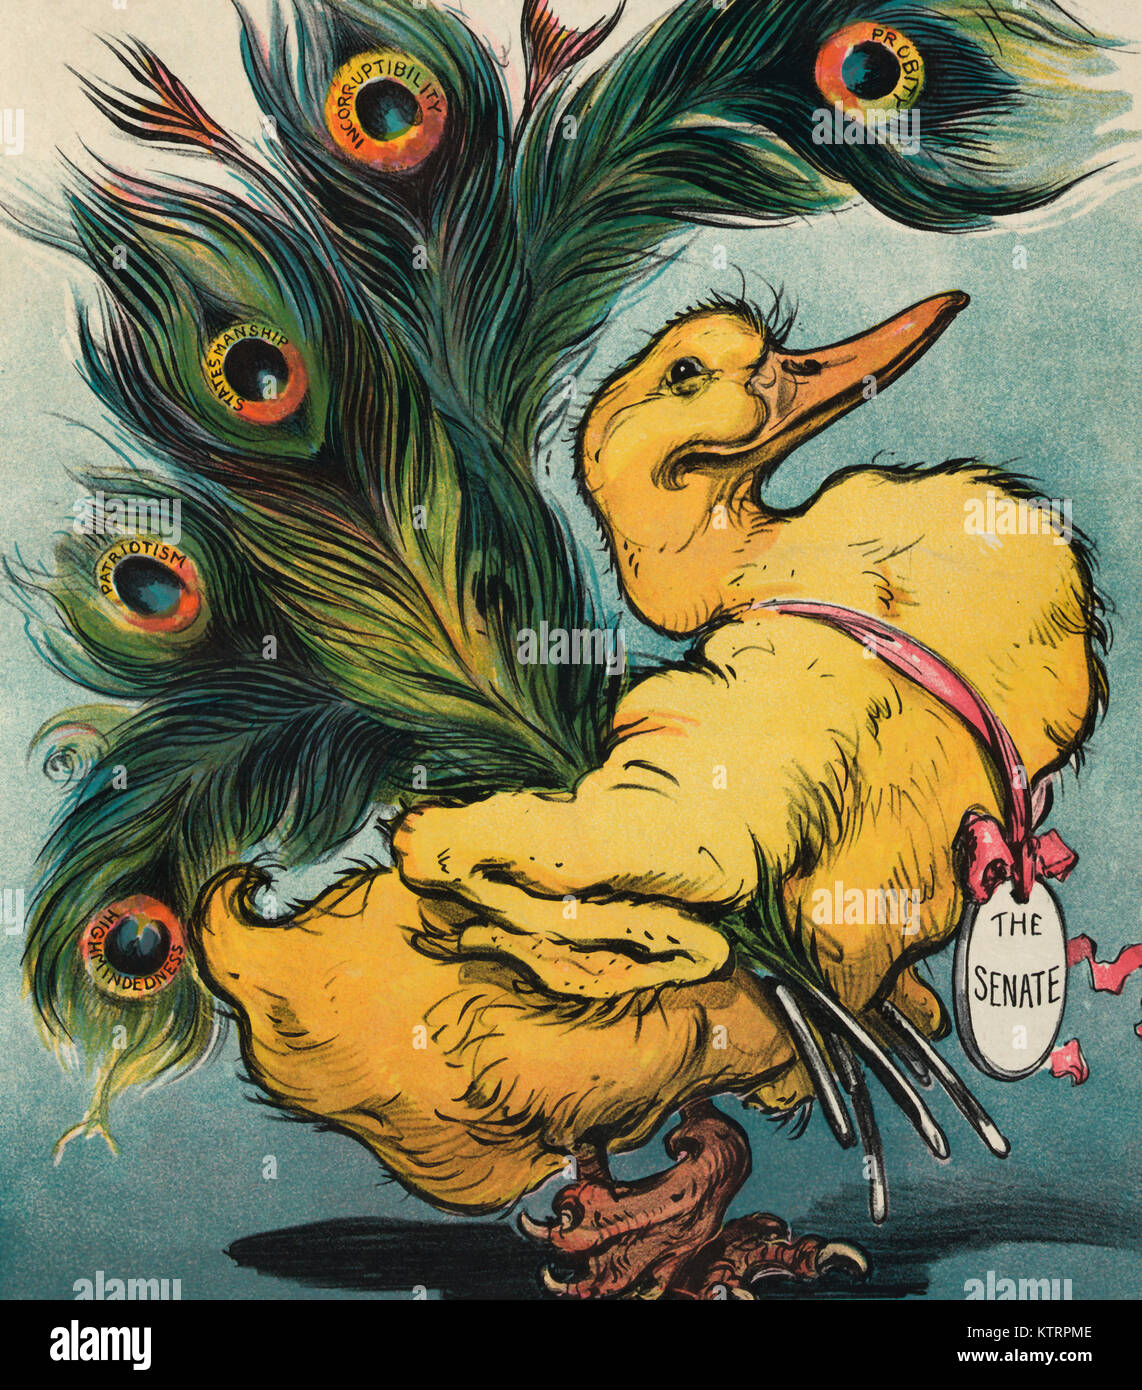 The ugly duckling - Illustration shows a duck with clawed-feet, wearing a medal labeled 'The Senate', carrying peacock feathers labeled 'Probity, Incorruptibility, Statesmanship, Patriotism, and Highmindedness'. Political Cartoon, 1906 Stock Photo